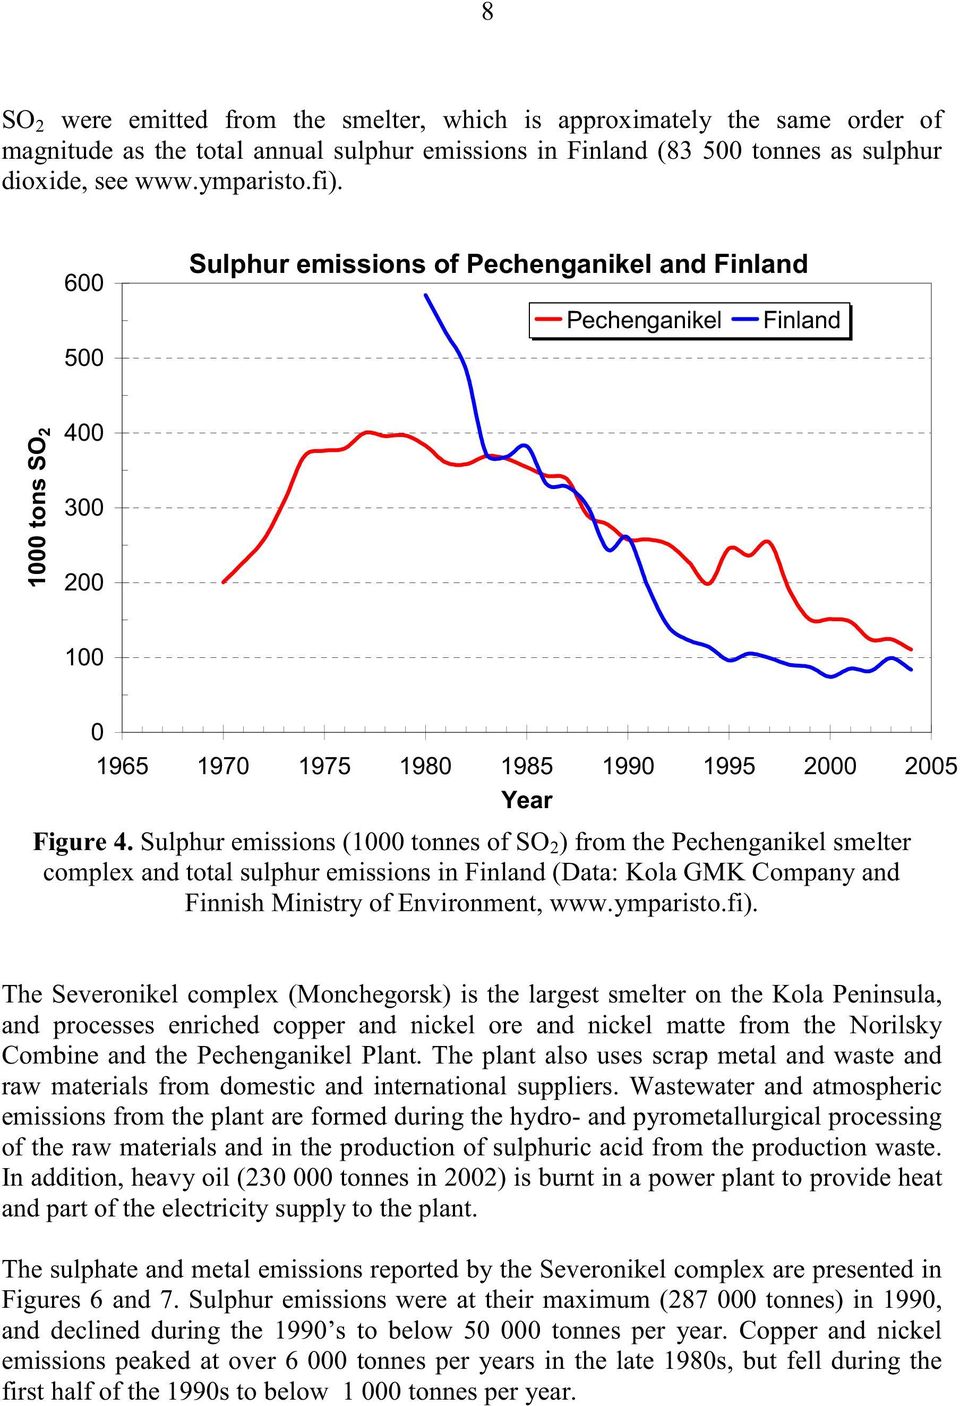 Sulphur emissions (1000 tonnes of SO 2 ) from the Pechenganikel smelter complex and total sulphur emissions in Finland (Data: Kola GMK Company and Finnish Ministry of Environment, www.ymparisto.fi).